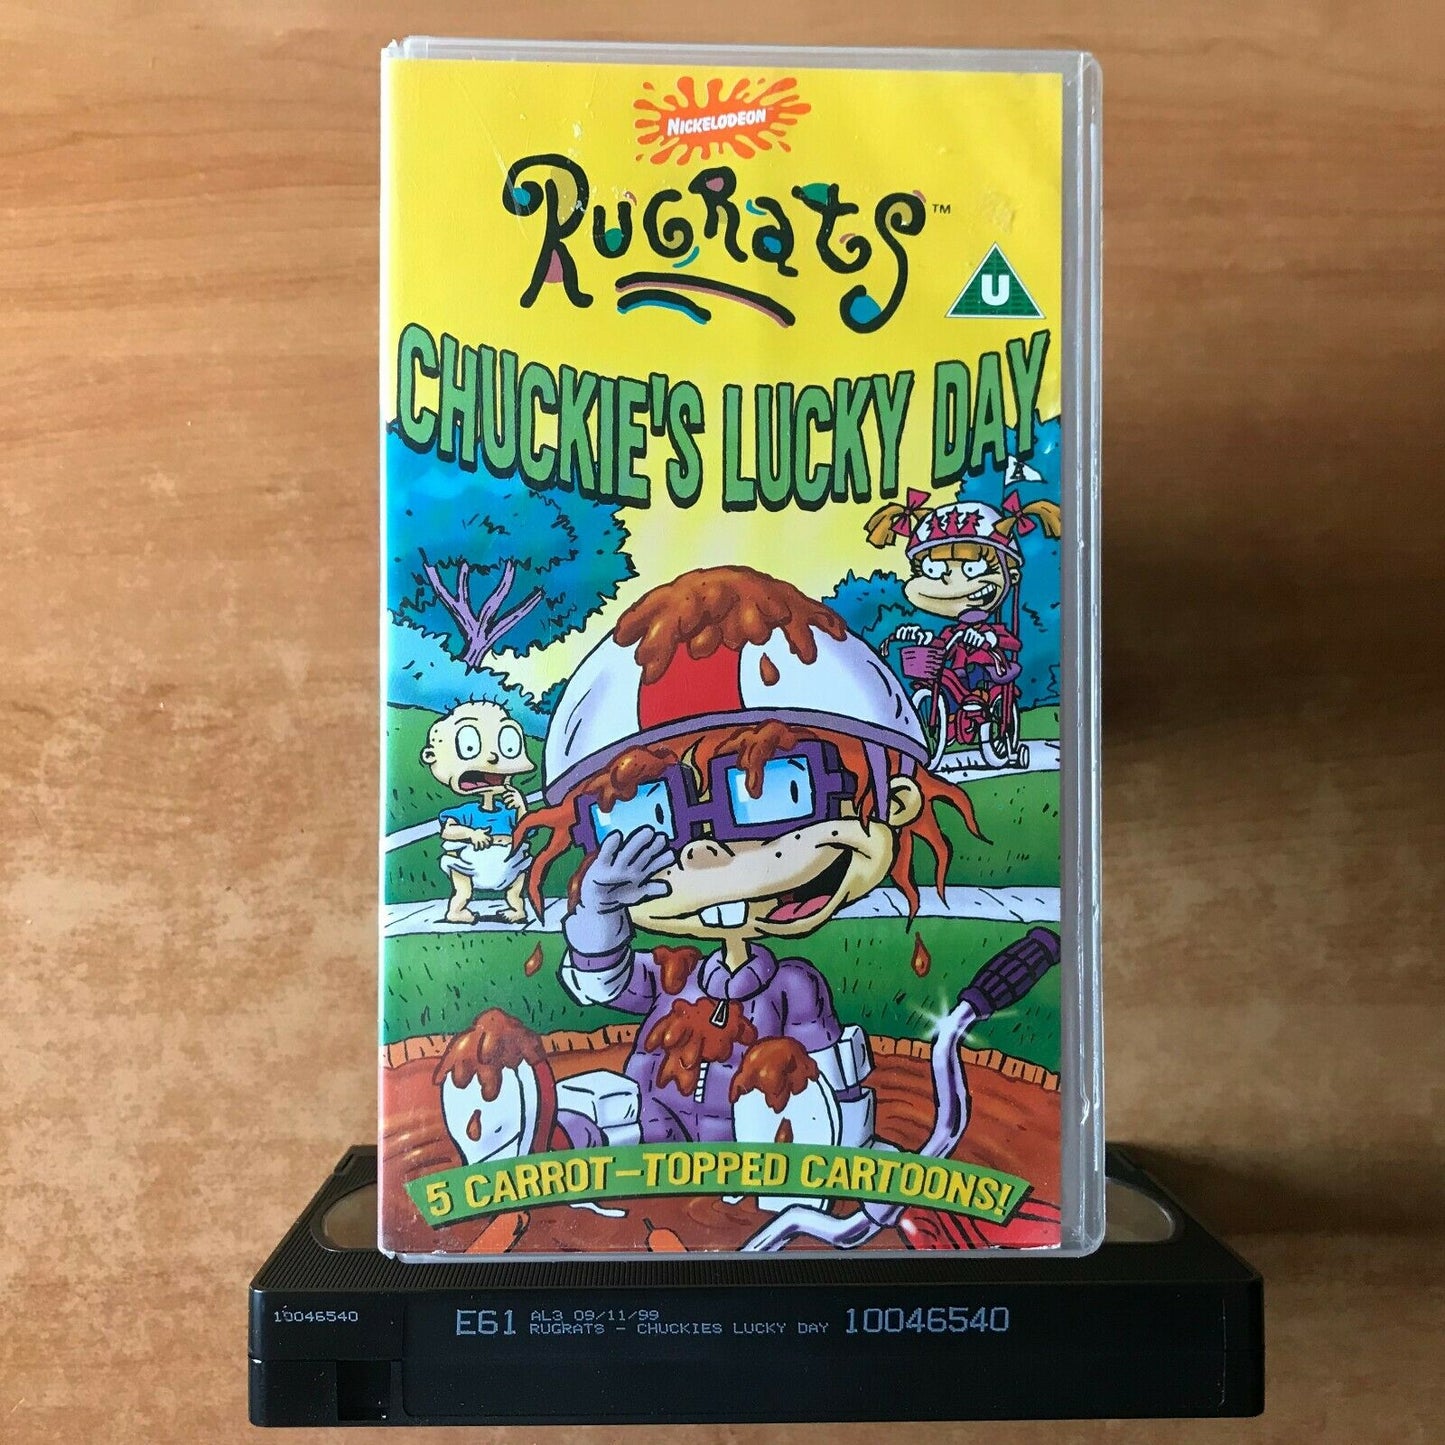 Rugrats: Chuckie's Lucky Day; [Nickelodeon]: "Uneasy Rider" - Children's - VHS-